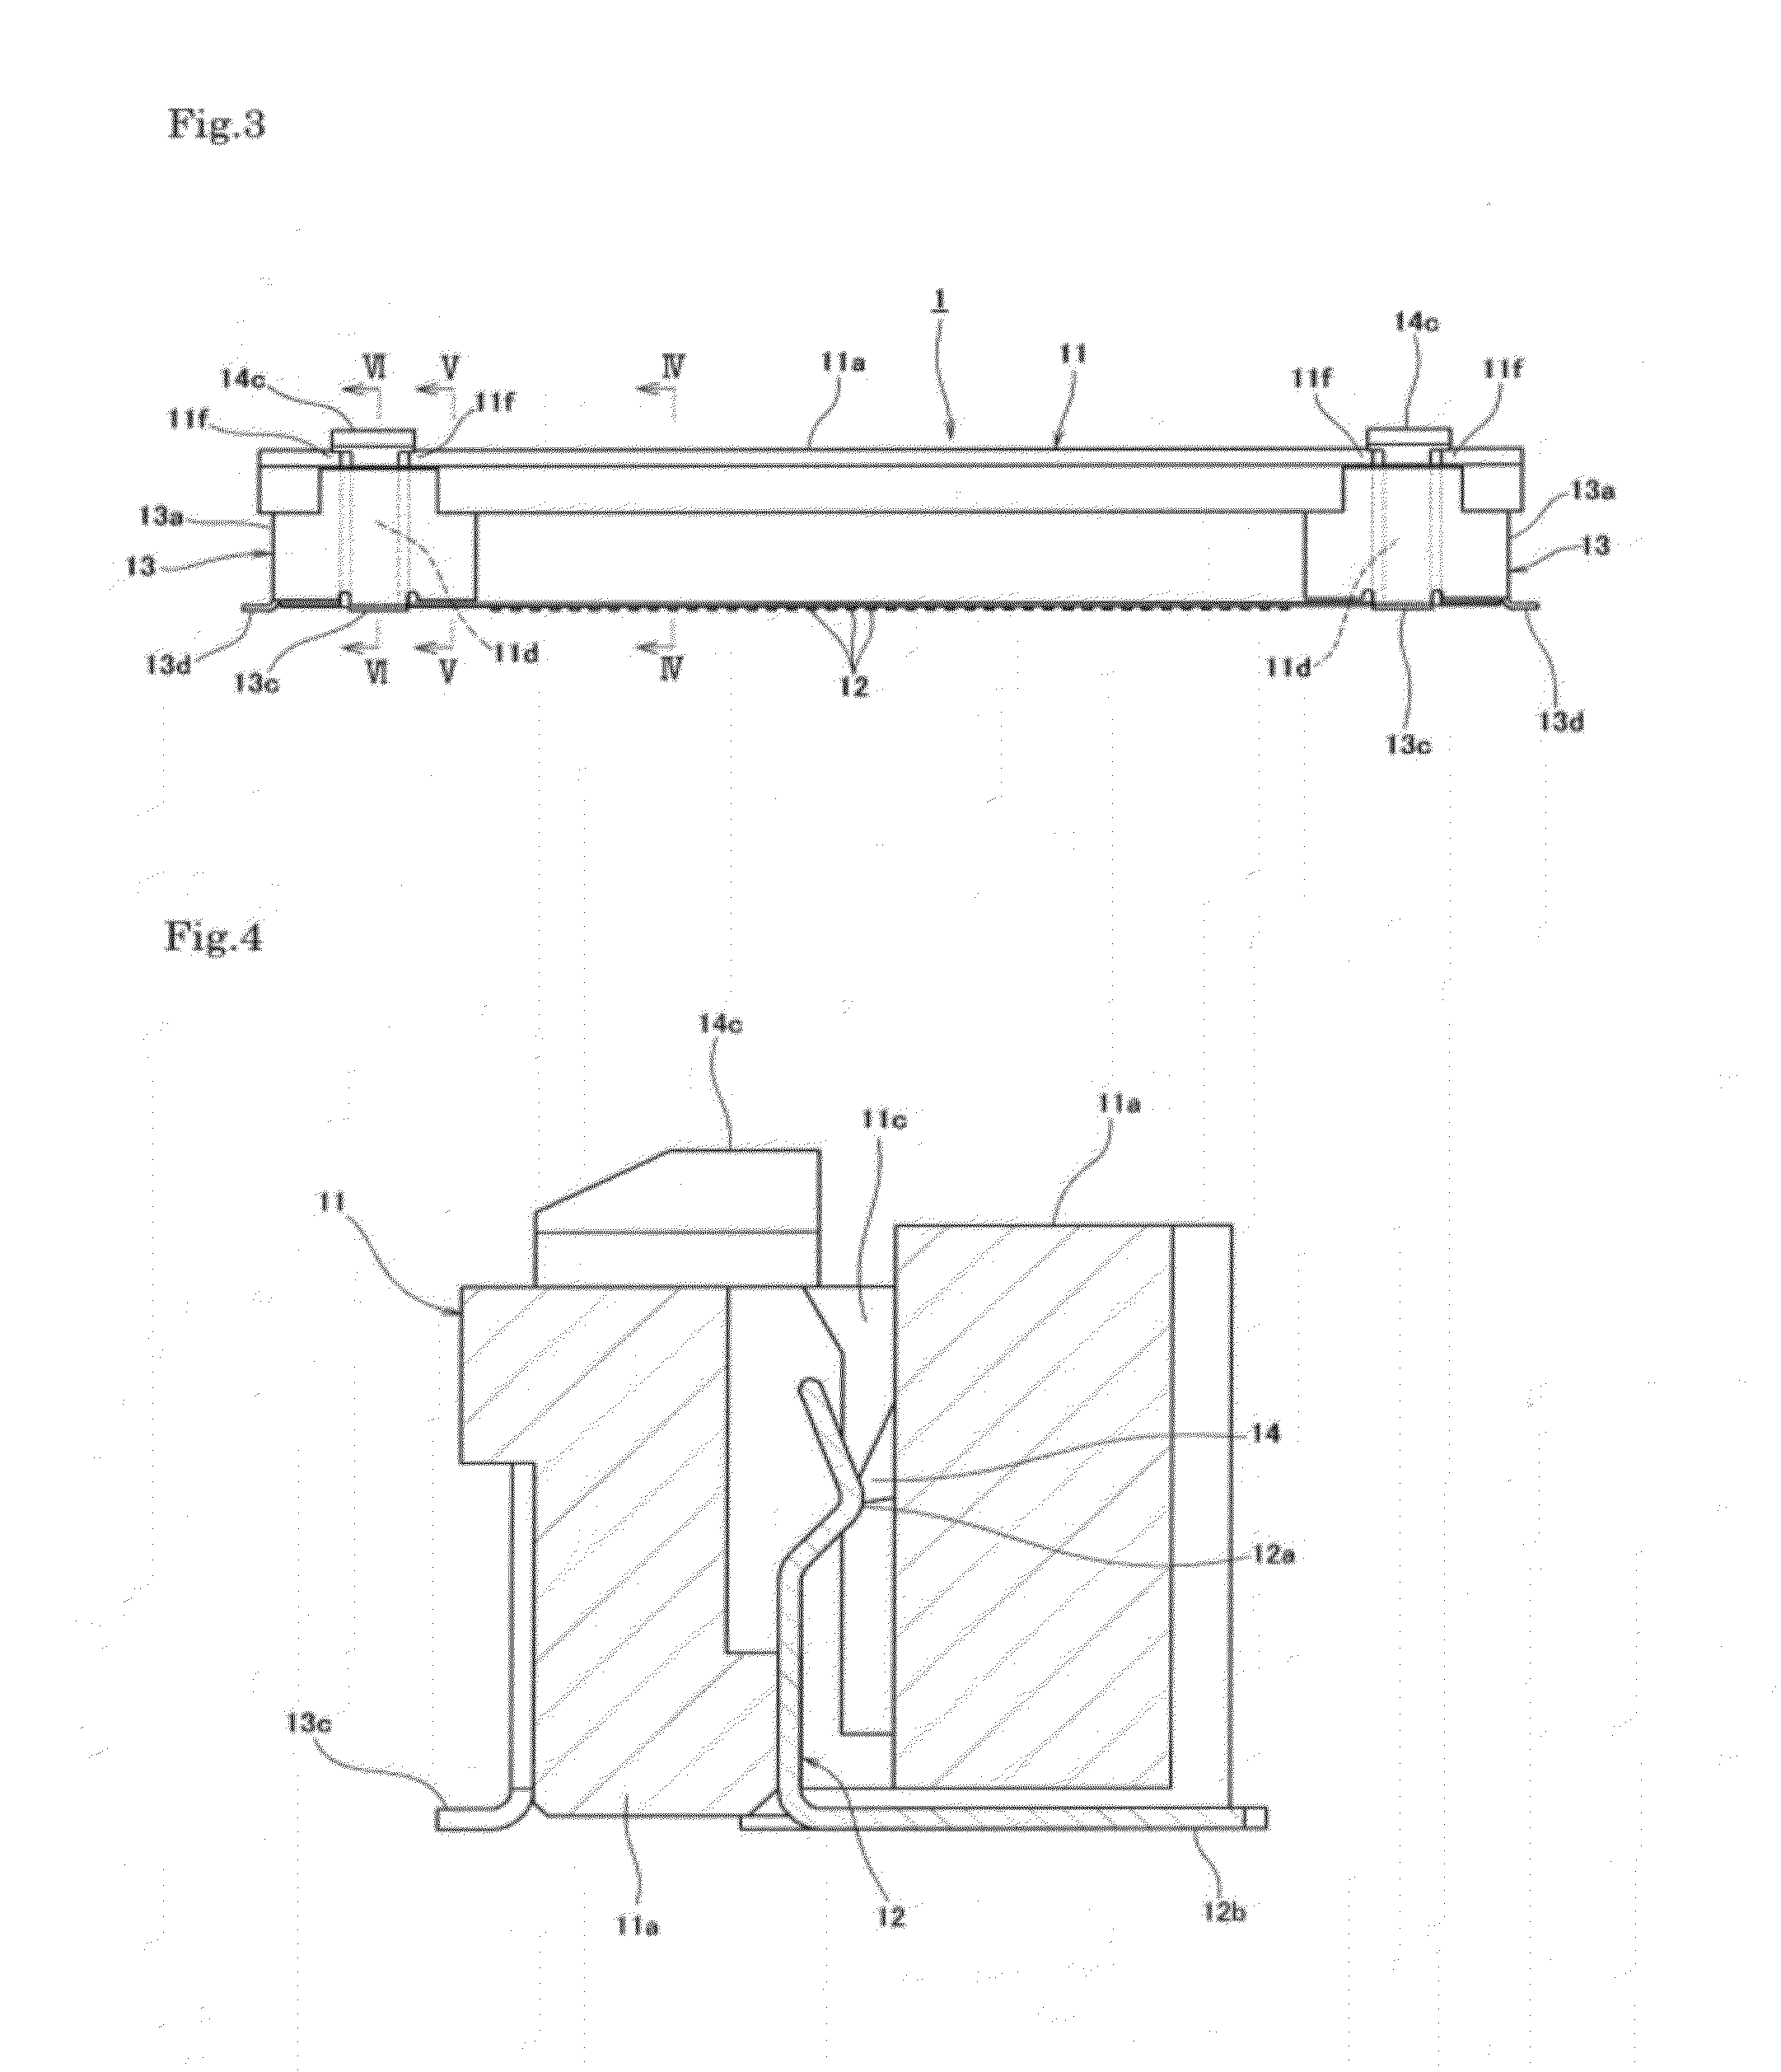 Electrical connector having a board connection leg portion with a locking portion to engage a signal transmission medium and a connector main body with an unlocking portion